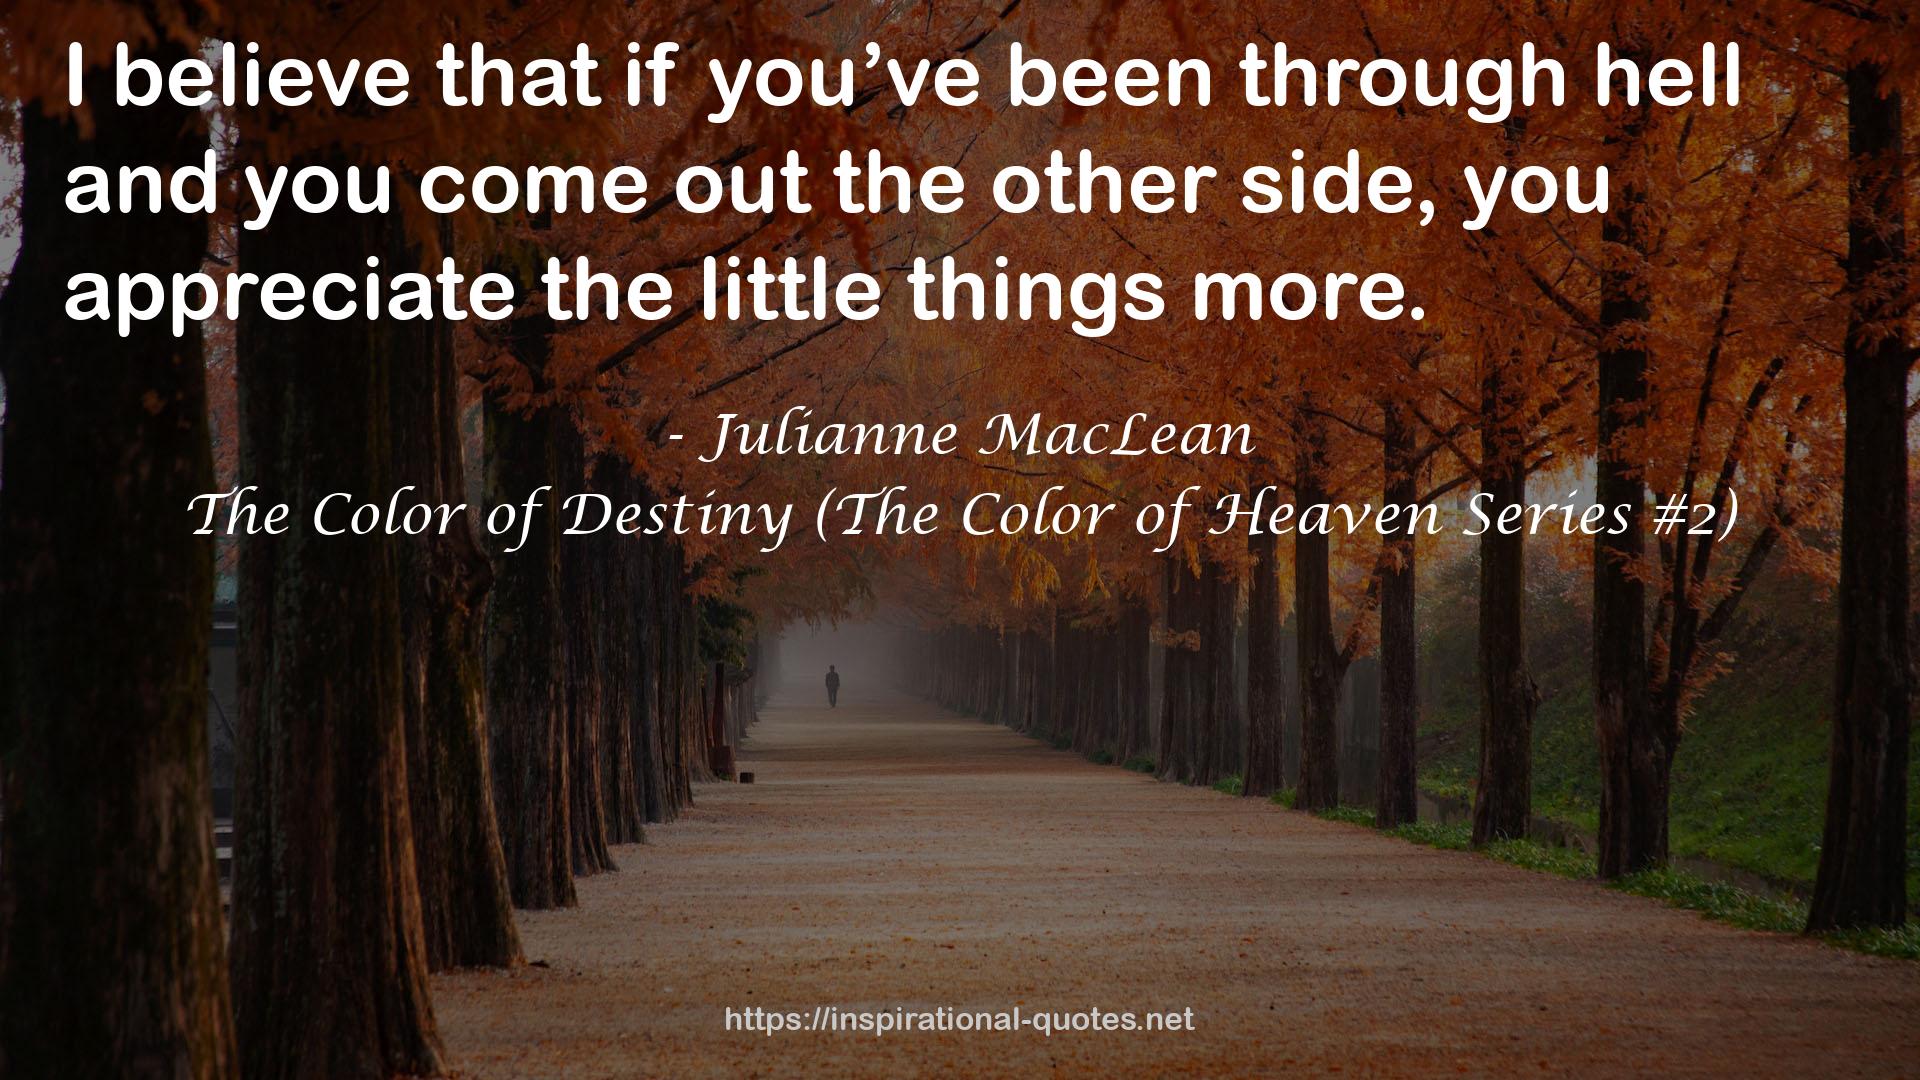 The Color of Destiny (The Color of Heaven Series #2) QUOTES